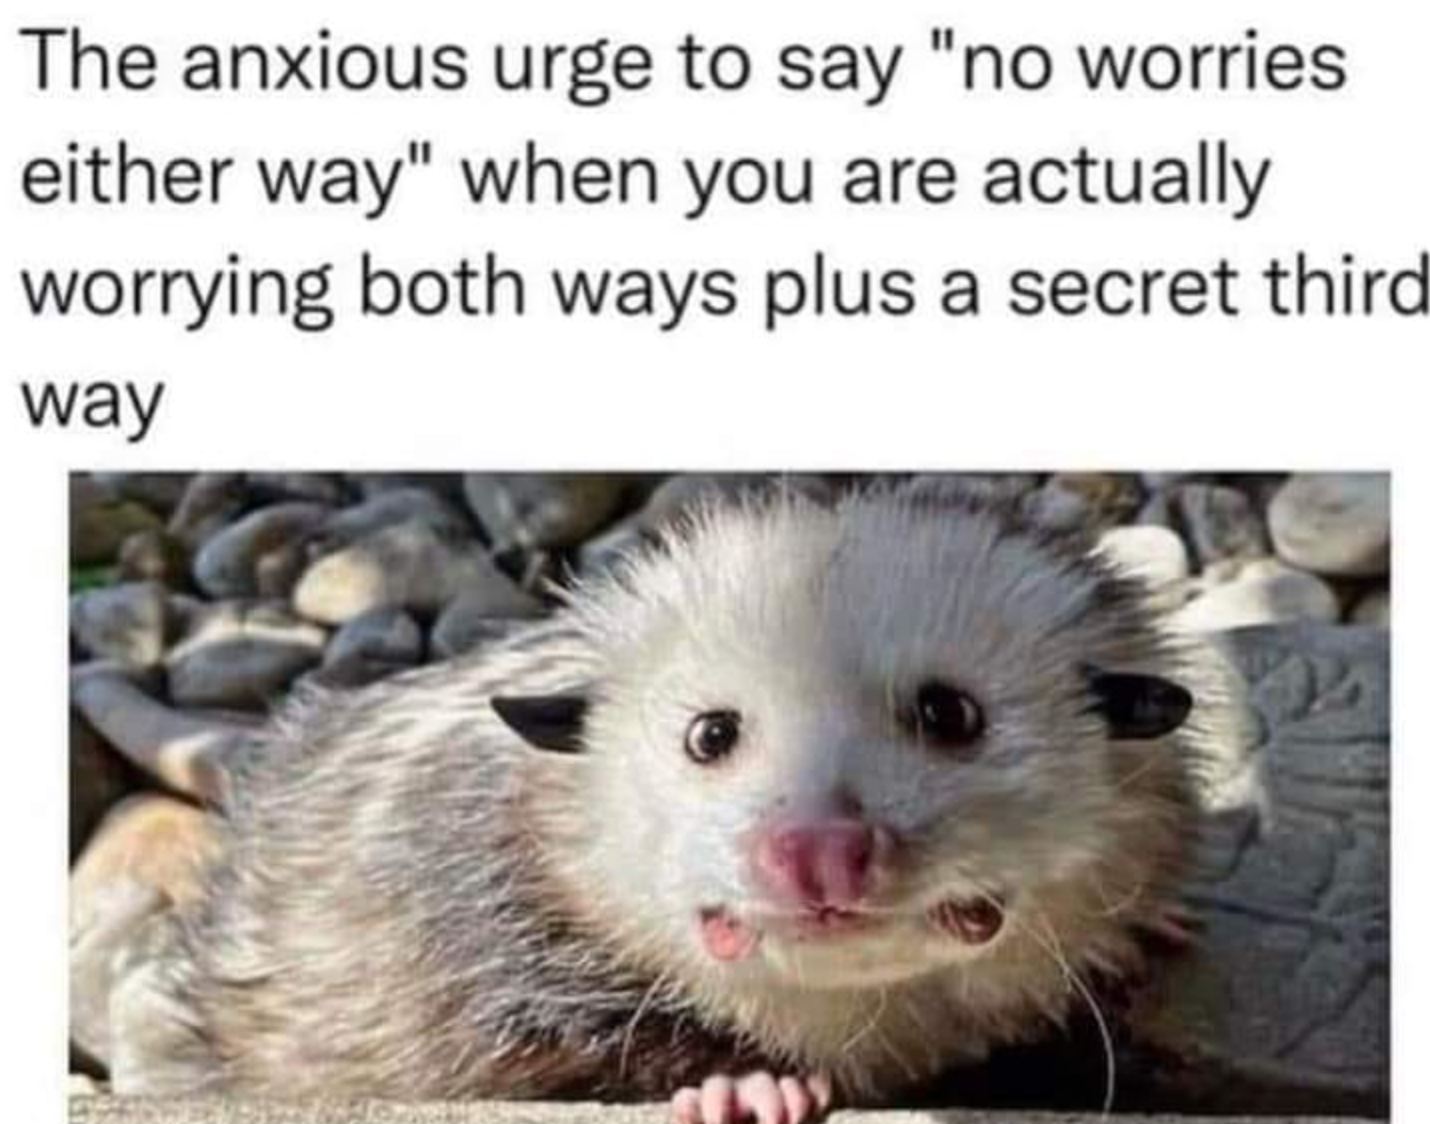 the anxious urge to say, no worries either way, when you are actually worrying both ways plus a secret third way, meme